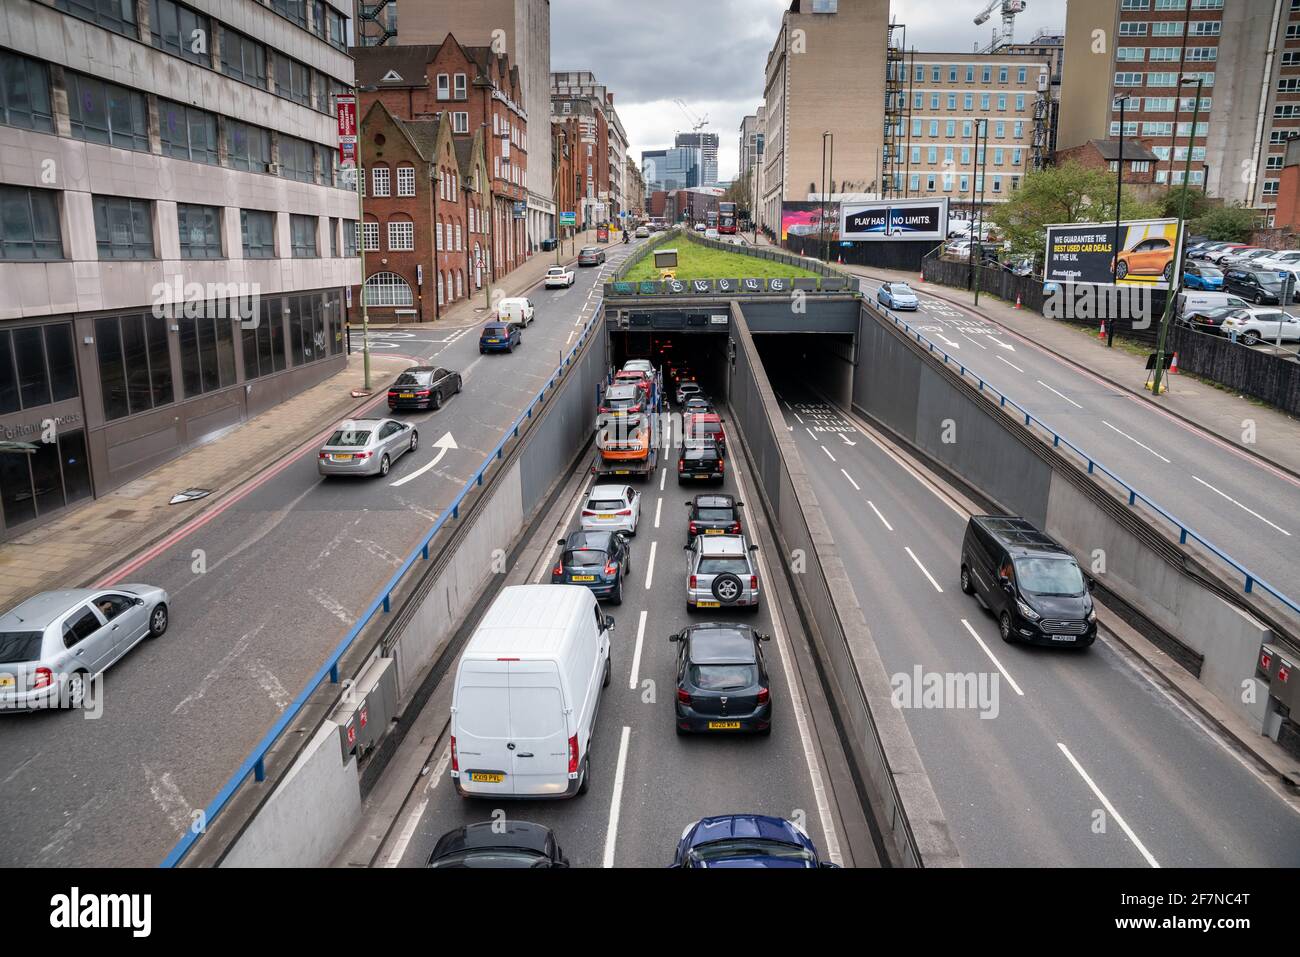 Traffic entering the A4400 Queensway tunnel in Birmingham, UK Stock Photo